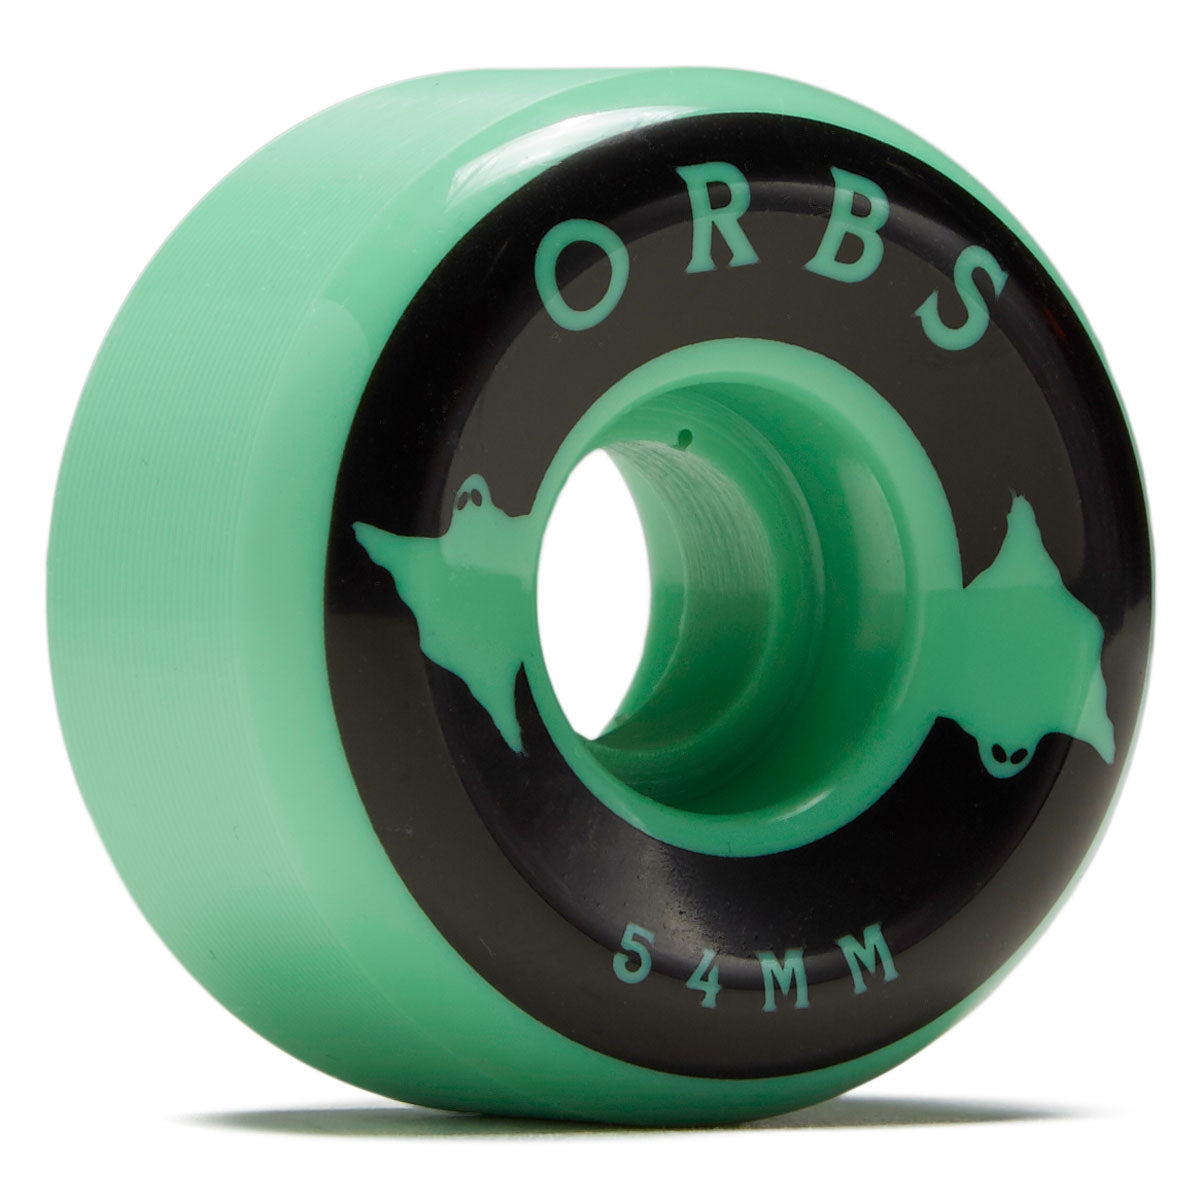 Welcome Orbs Specters Conical 99A Skateboard Wheels - Mint - 54mm image 1